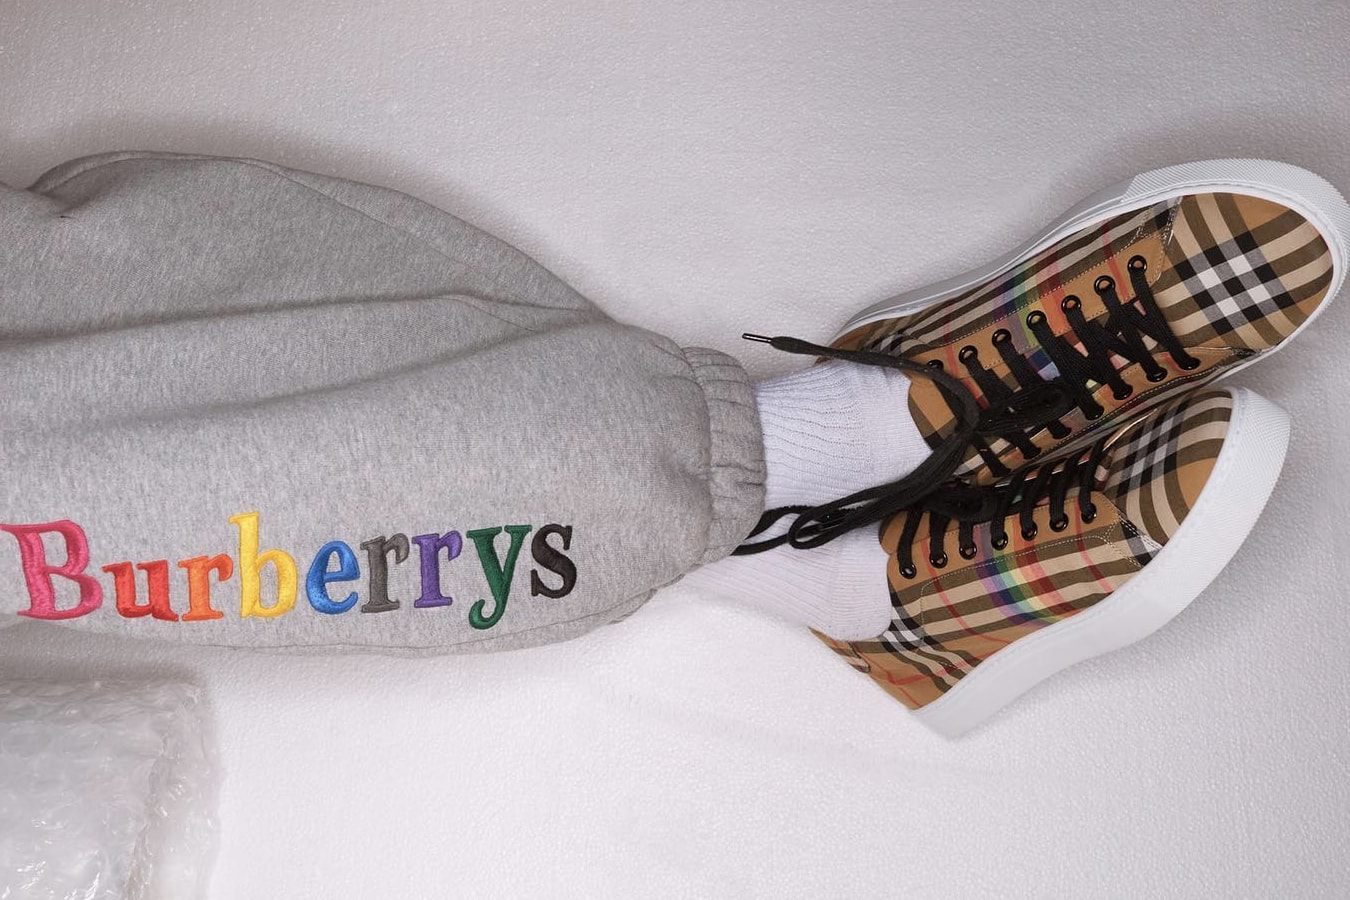 Burberry rainbow check tartan plaid sneakers burberrys embroidered sweat pants Christopher bailey lfw london fashion week where to buy